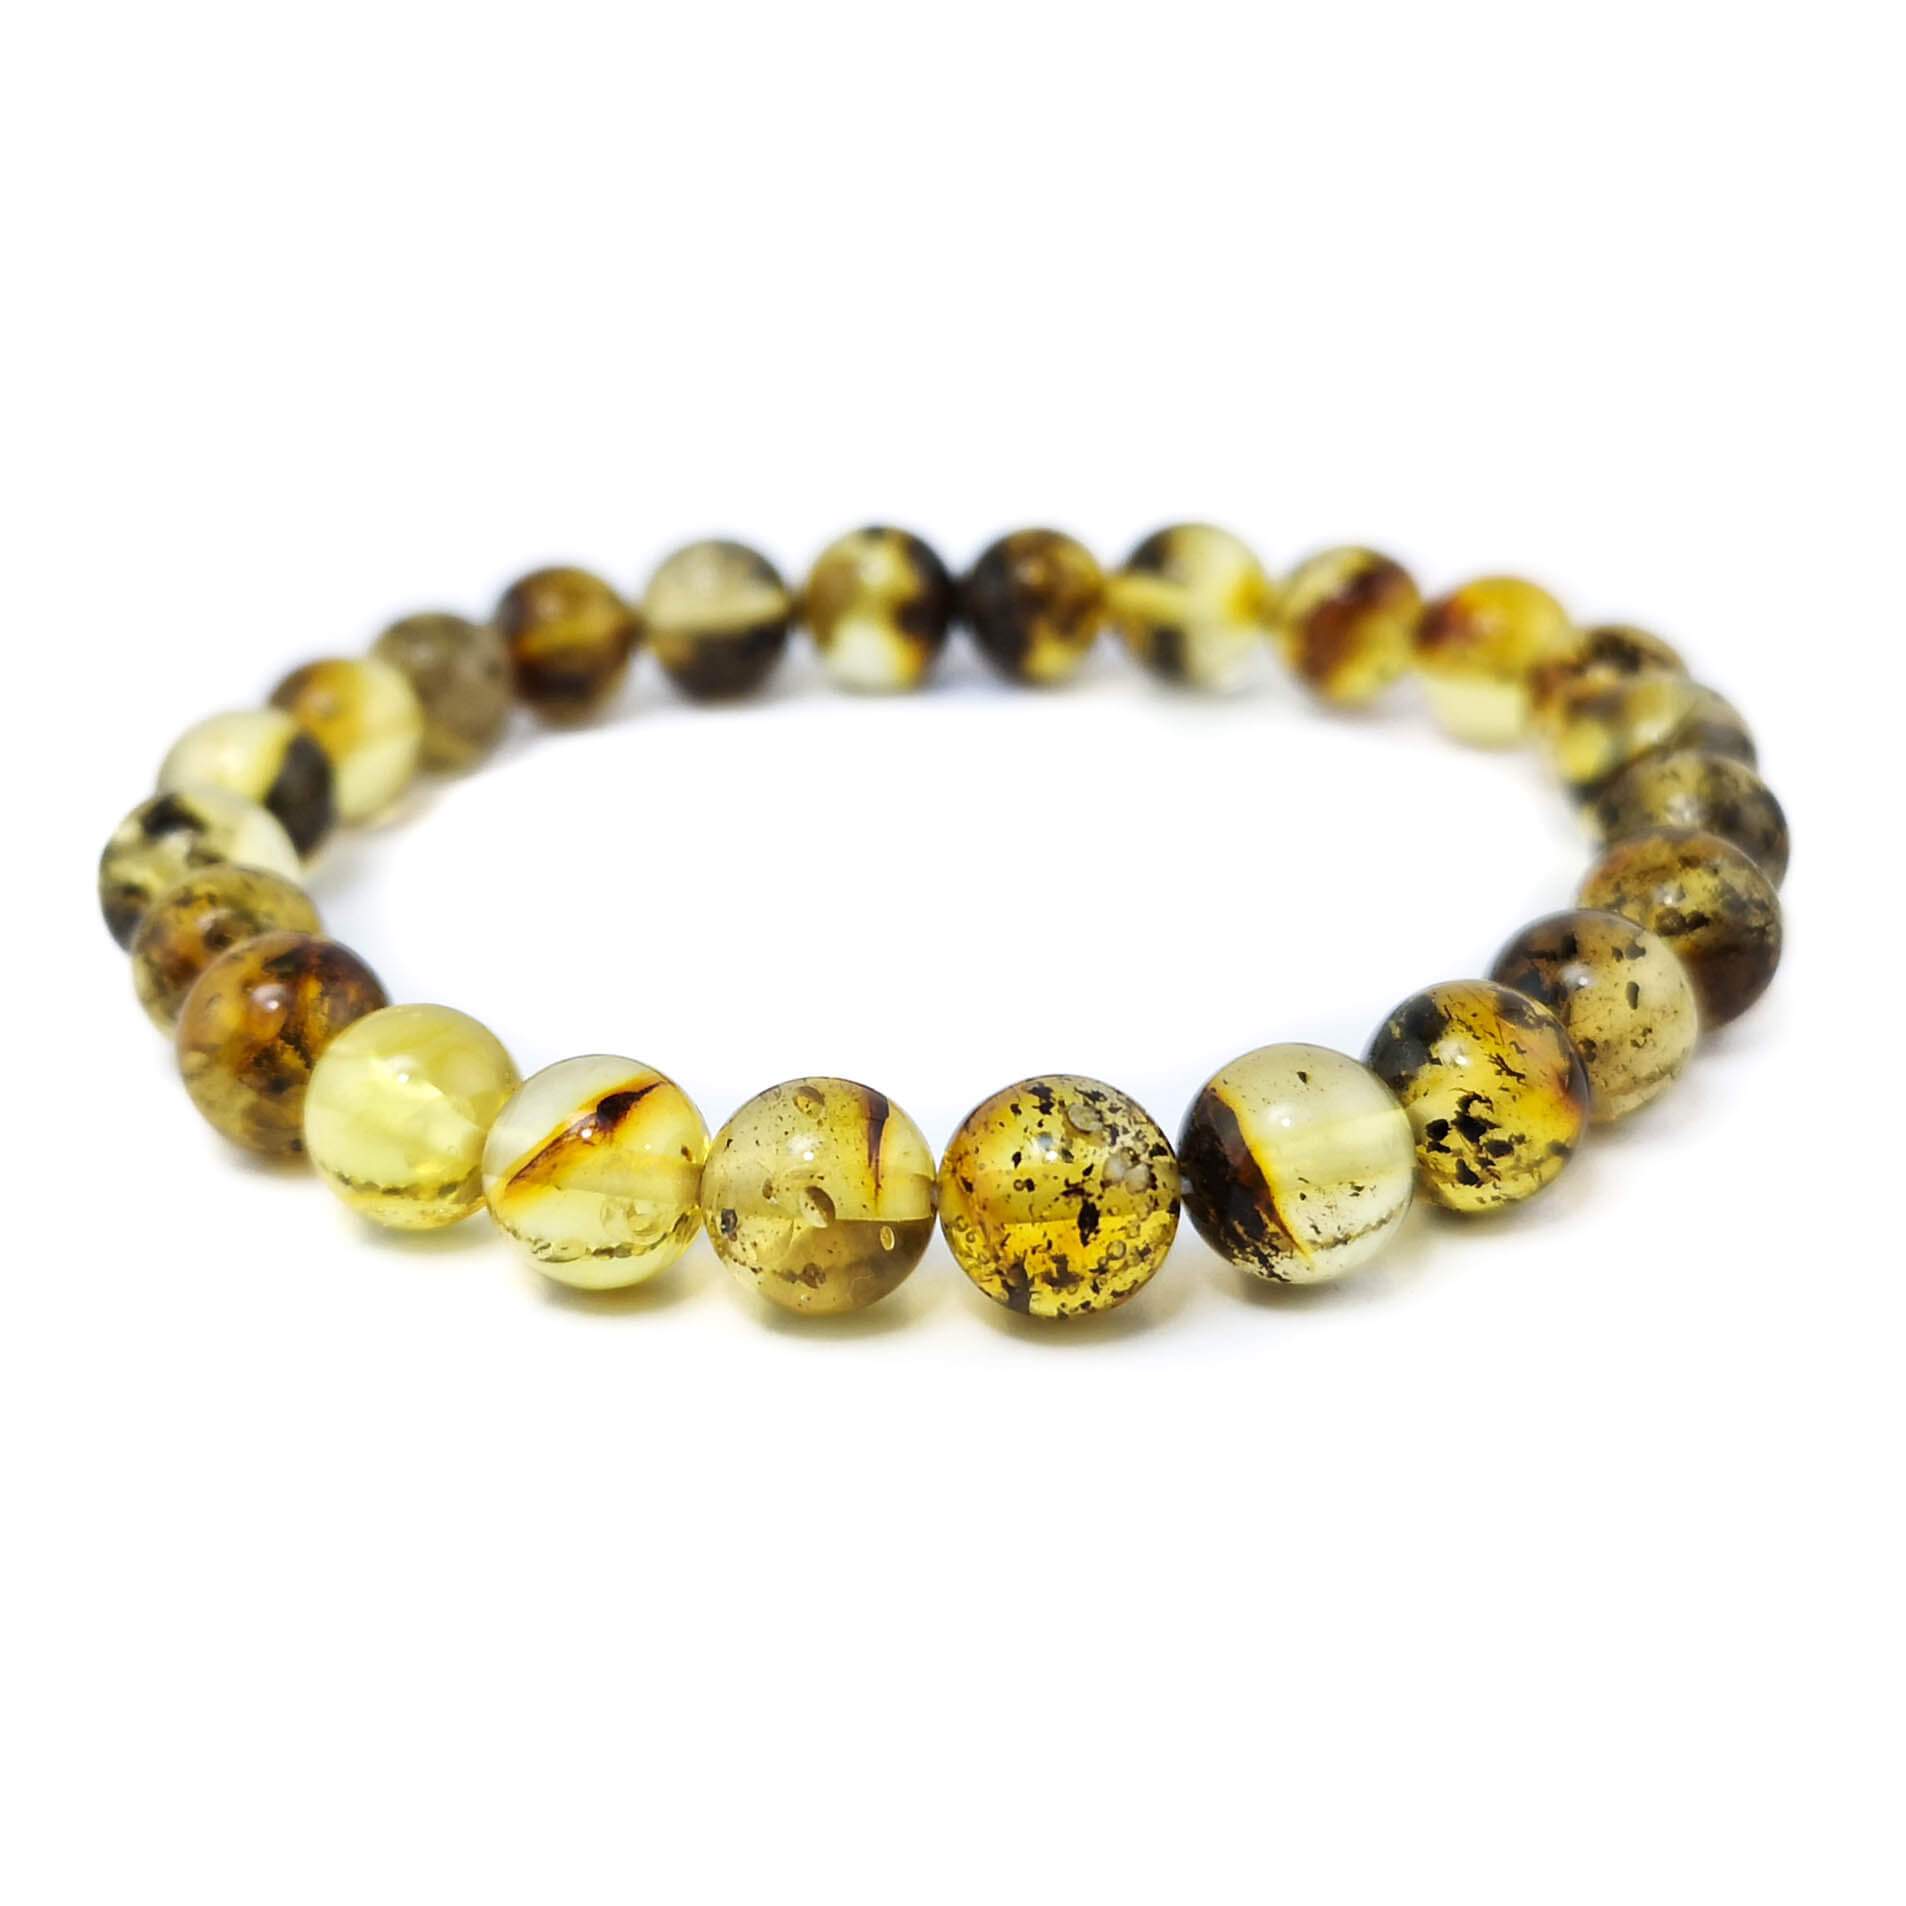 Transparent amber bracelet with smart inclusions "Amber Journey"